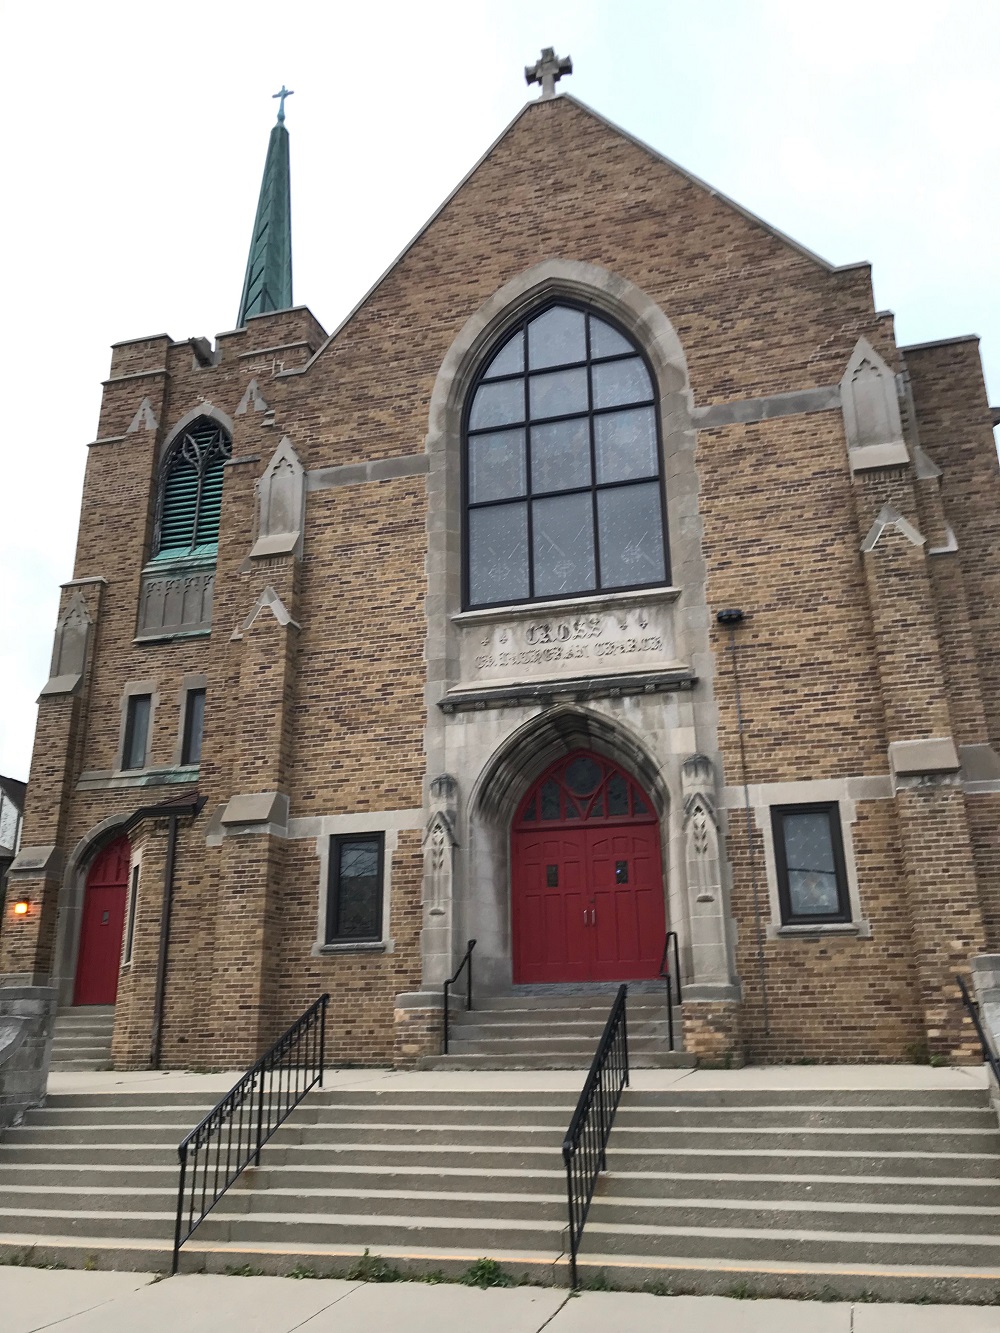 A brown brick church with red double doors and a green steeple and additional entrance with red doors to the left is pictured on an overcast day. There is a large stained glass window in the middle of the church, above the red doors.